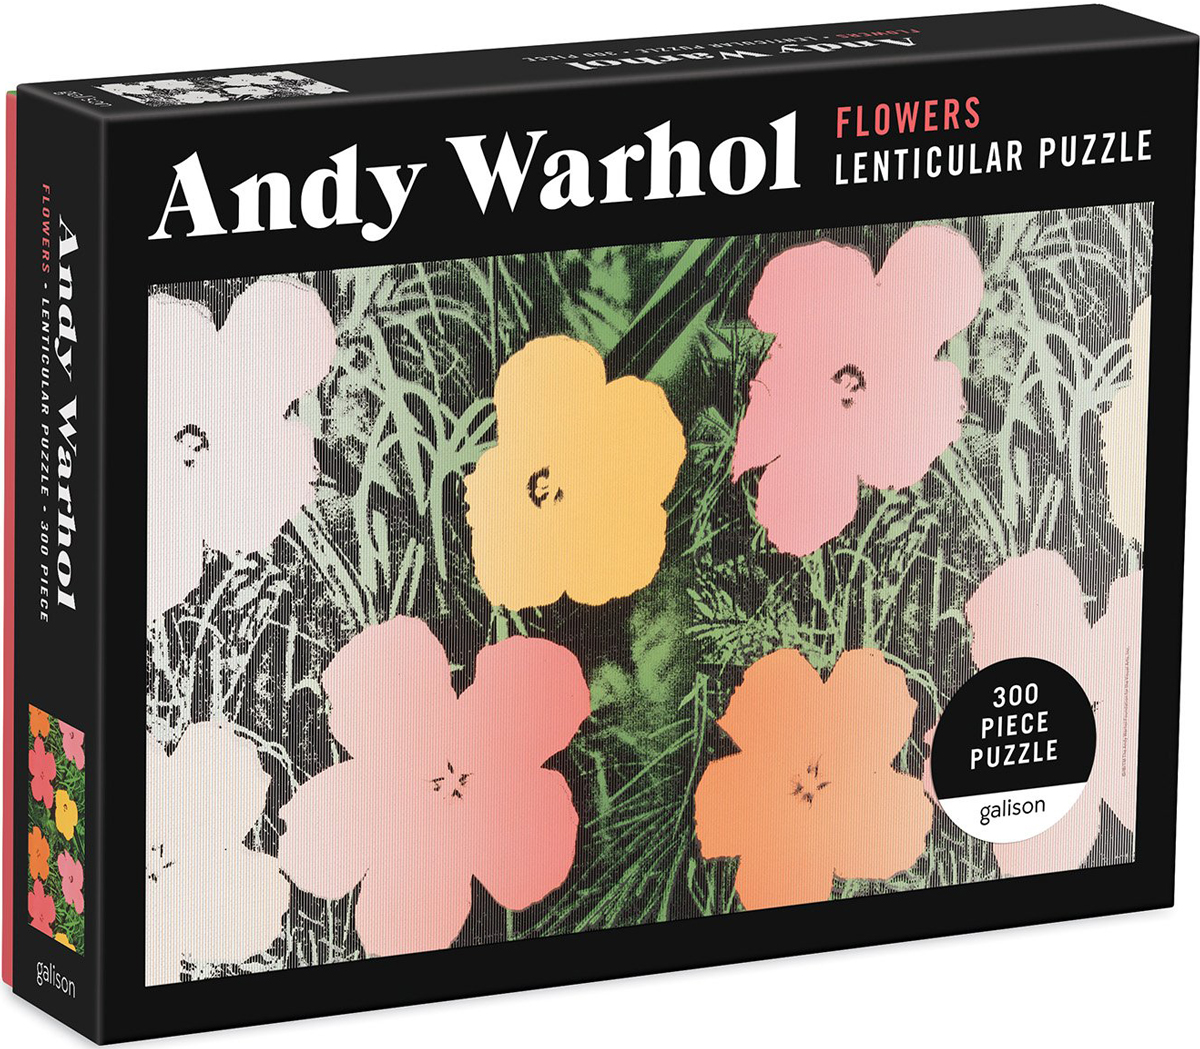 Andy Warhol Flowers Lenticular Puzzle Flower & Garden Jigsaw Puzzle